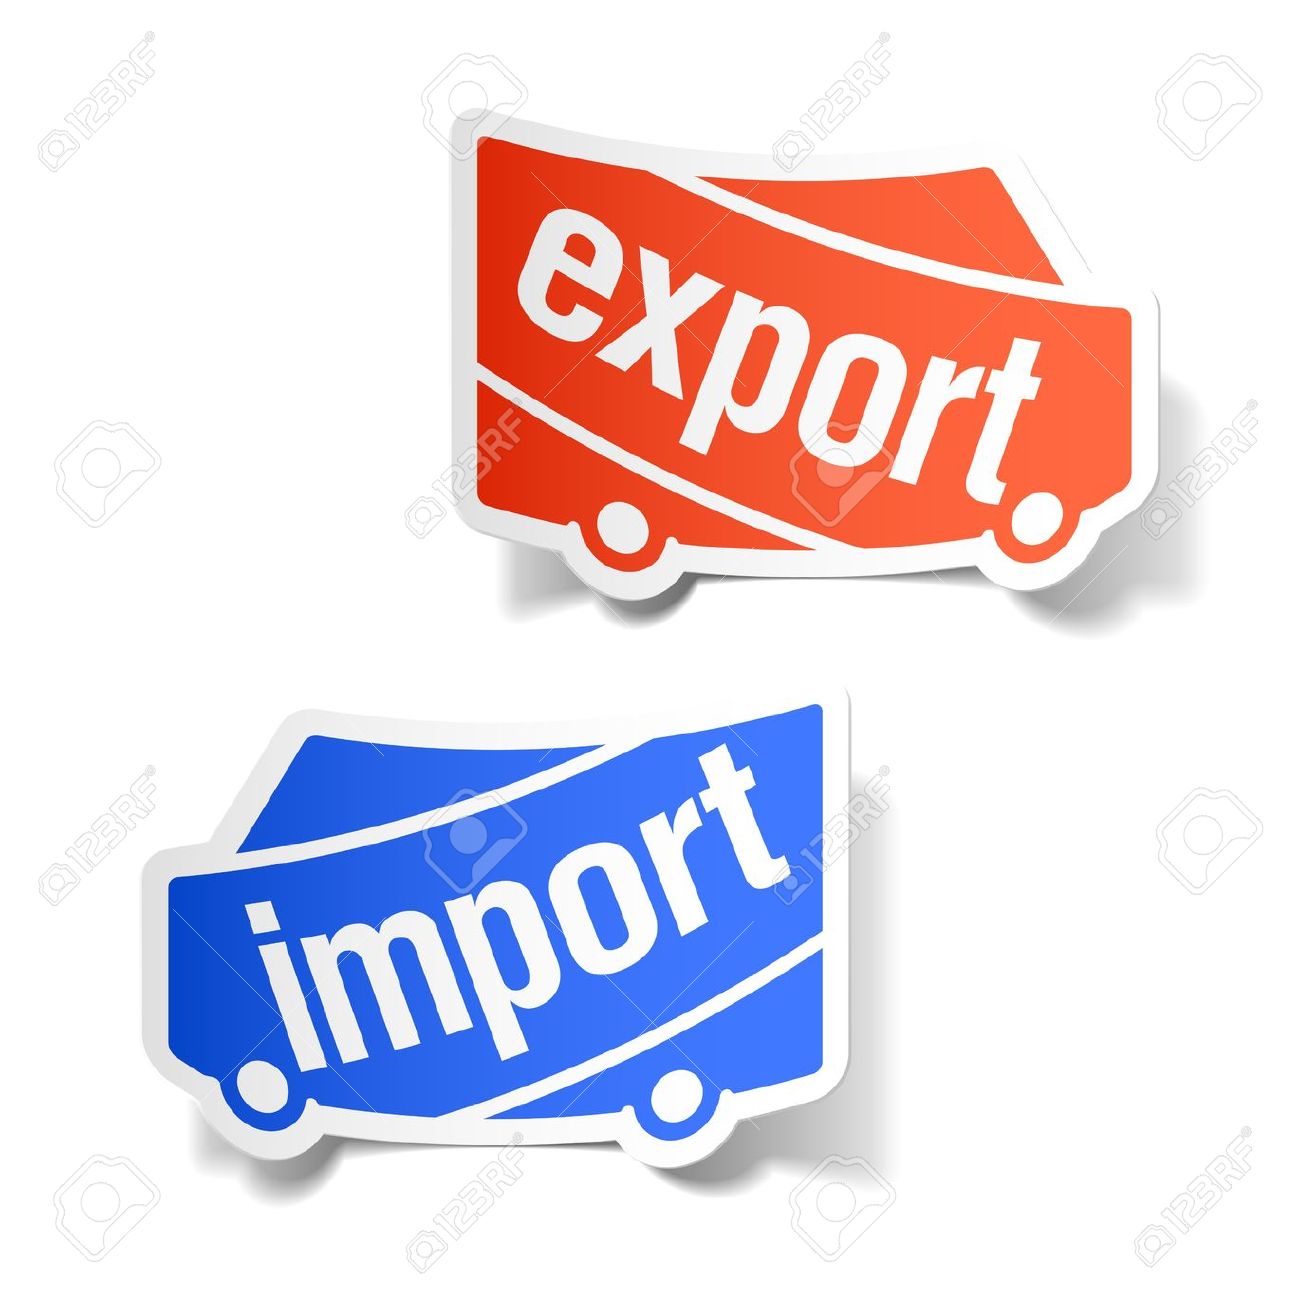 13,063 Export Import Cliparts, Stock Vector And Royalty Free.